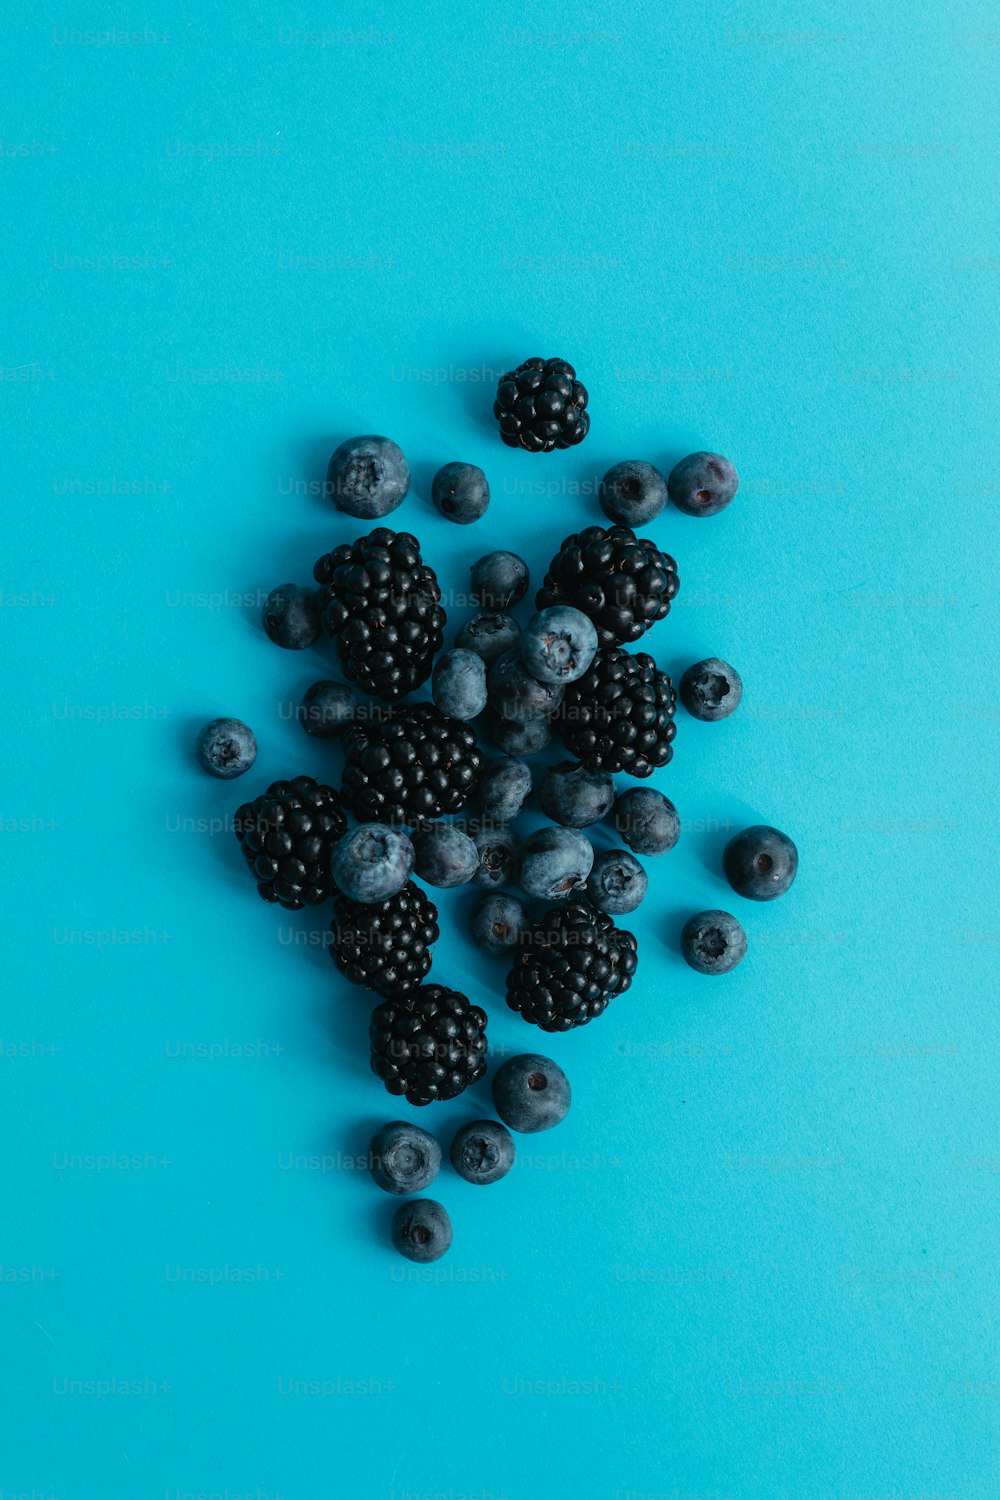 a pile of berries and blueberries on a blue background